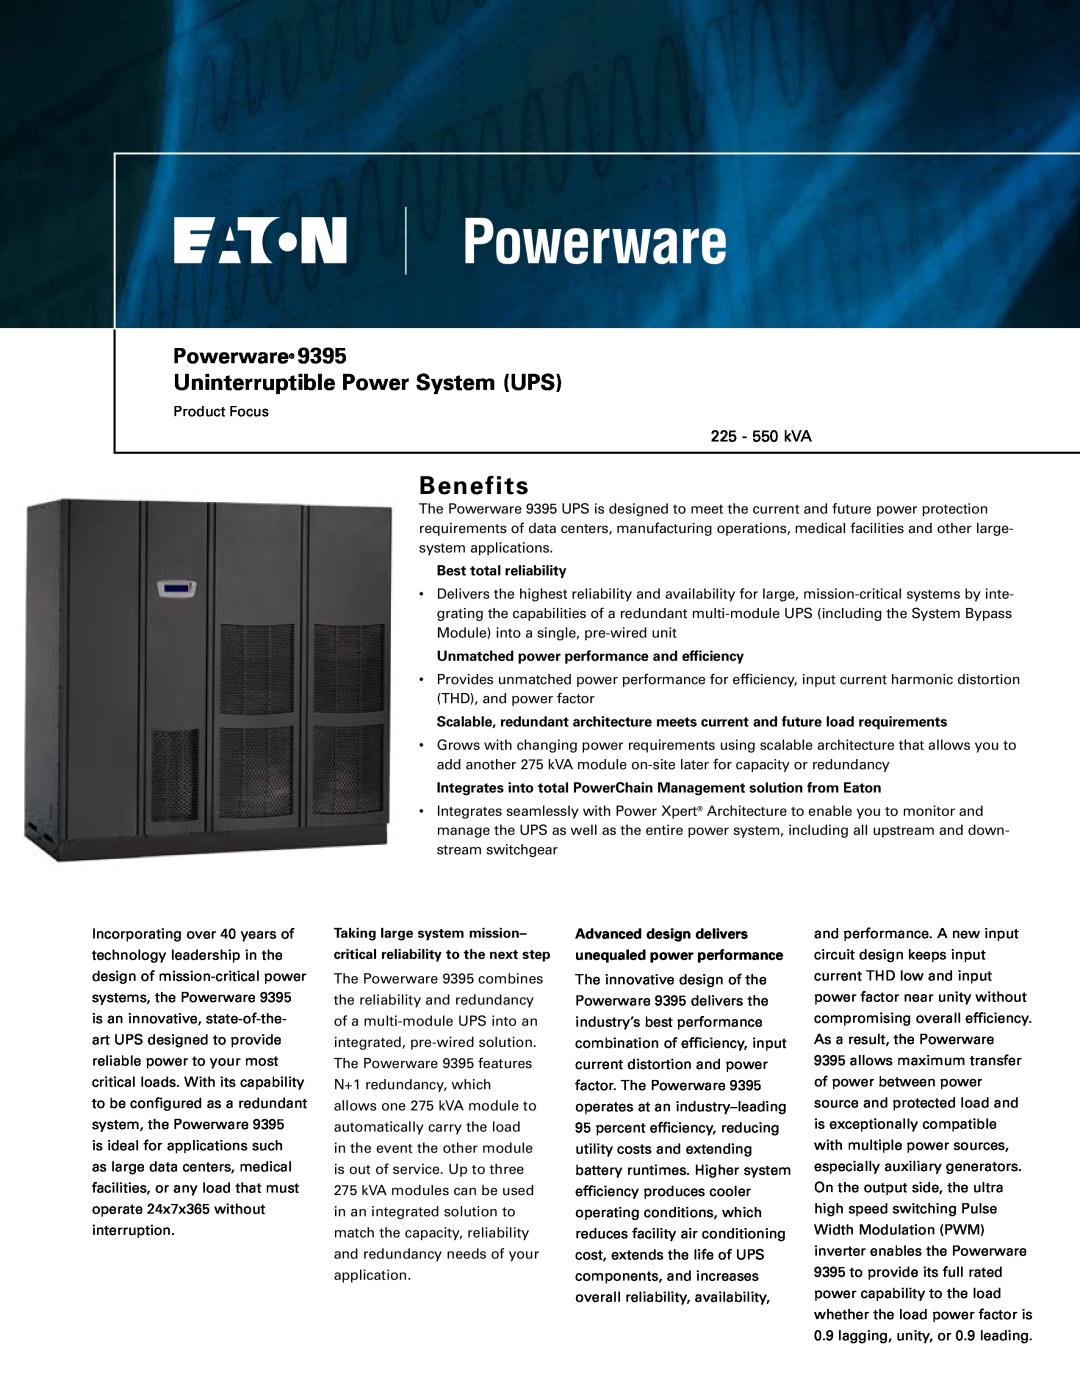 Powerware 9395 manual Best total reliability, Unmatched power performance and efficiency, Benefits, Powerware 